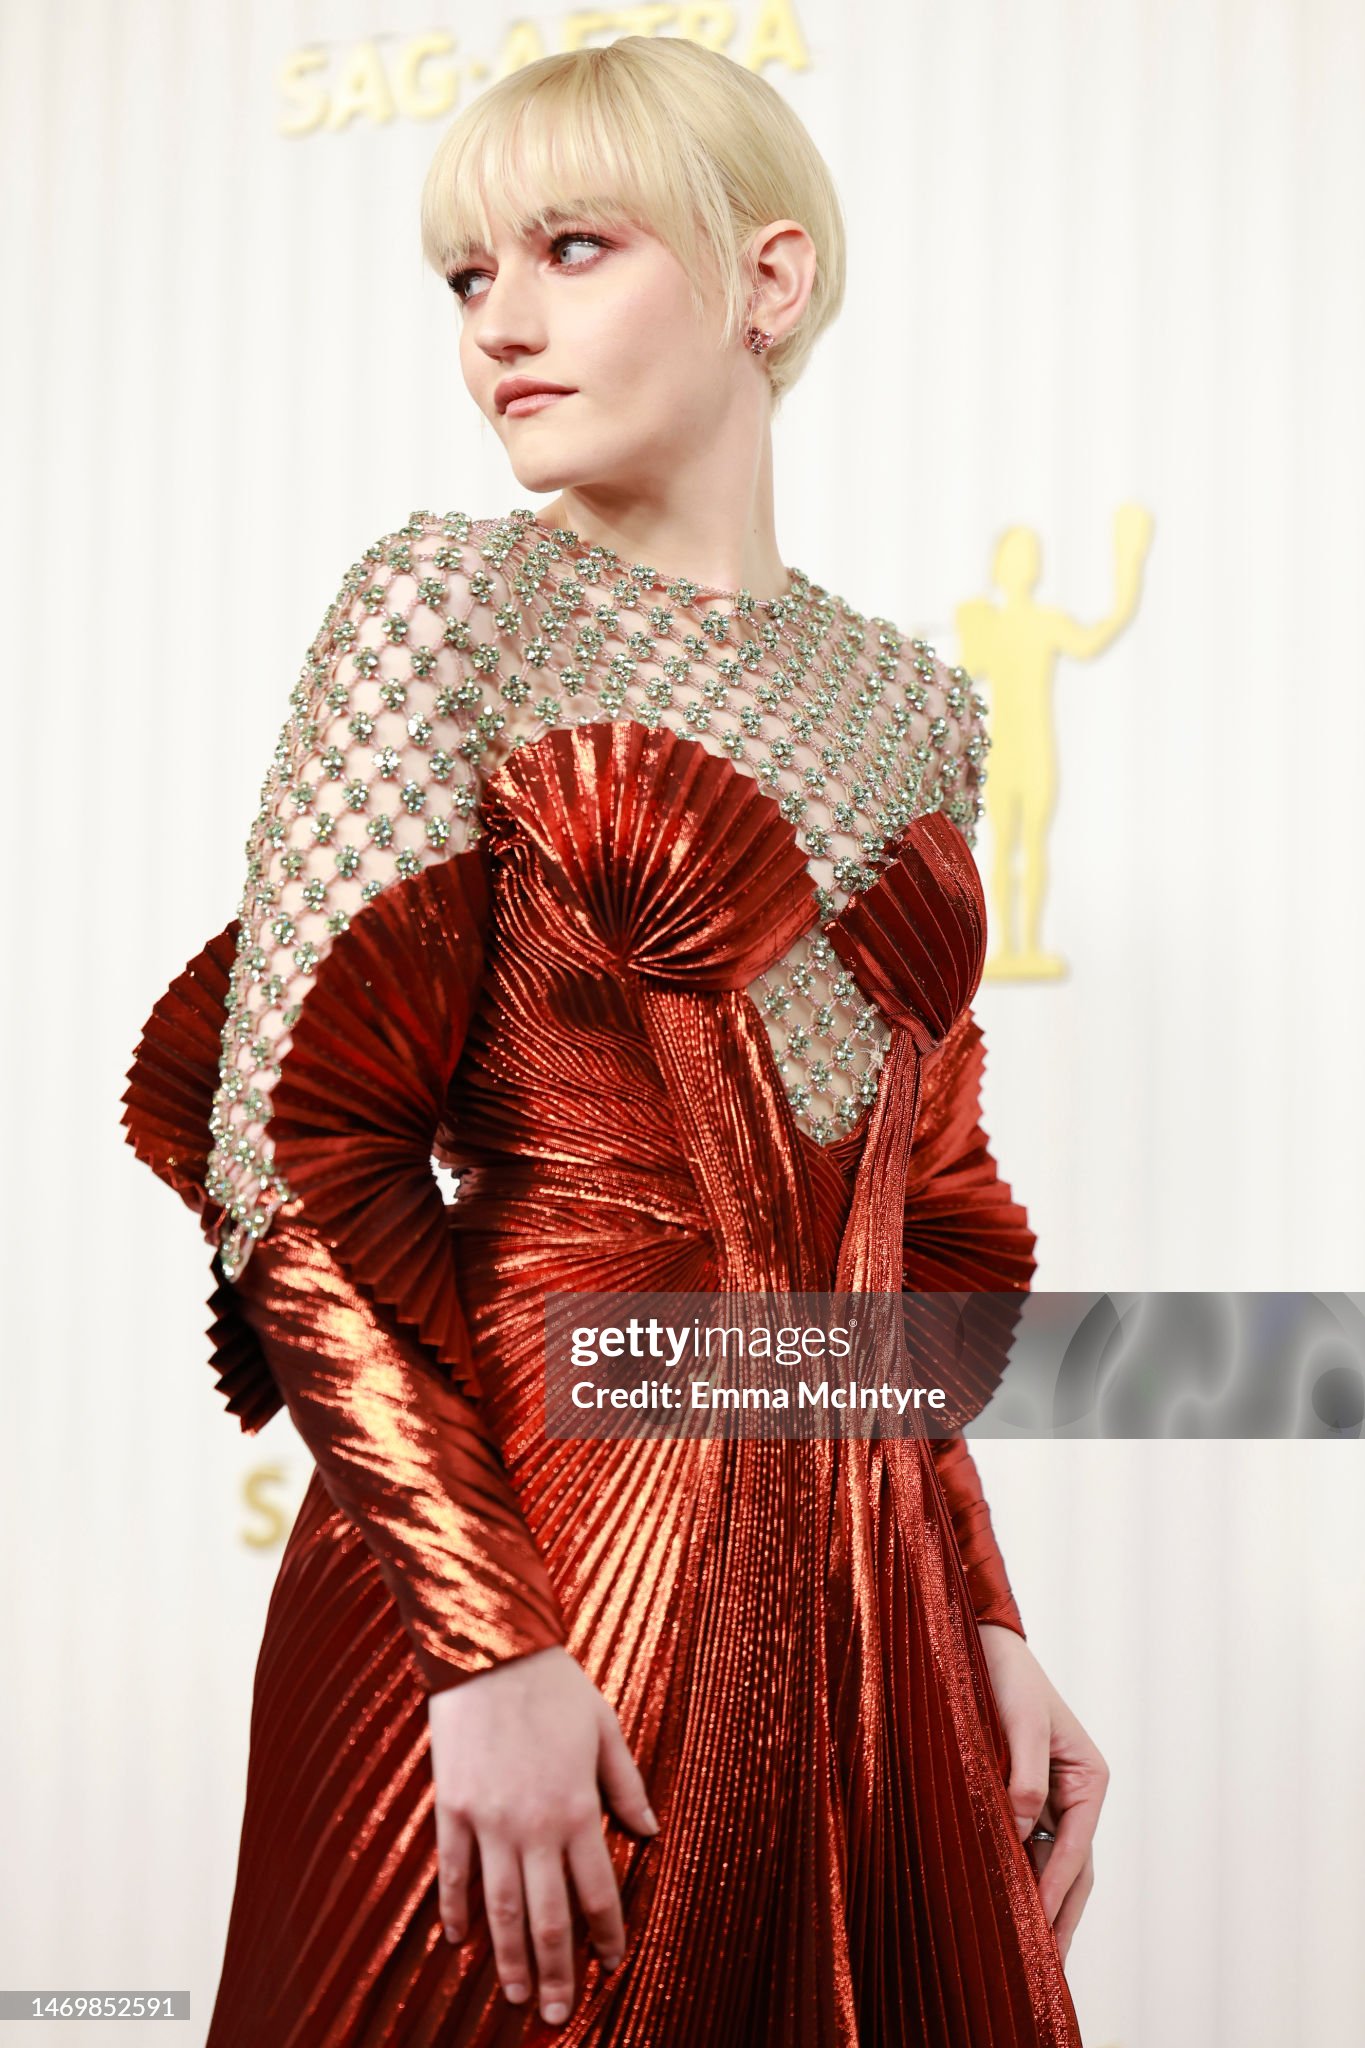 julia-garner-attends-the-29th-annual-screen-actors-guild-awards-at-fairmont-century-plaza-on.jpg